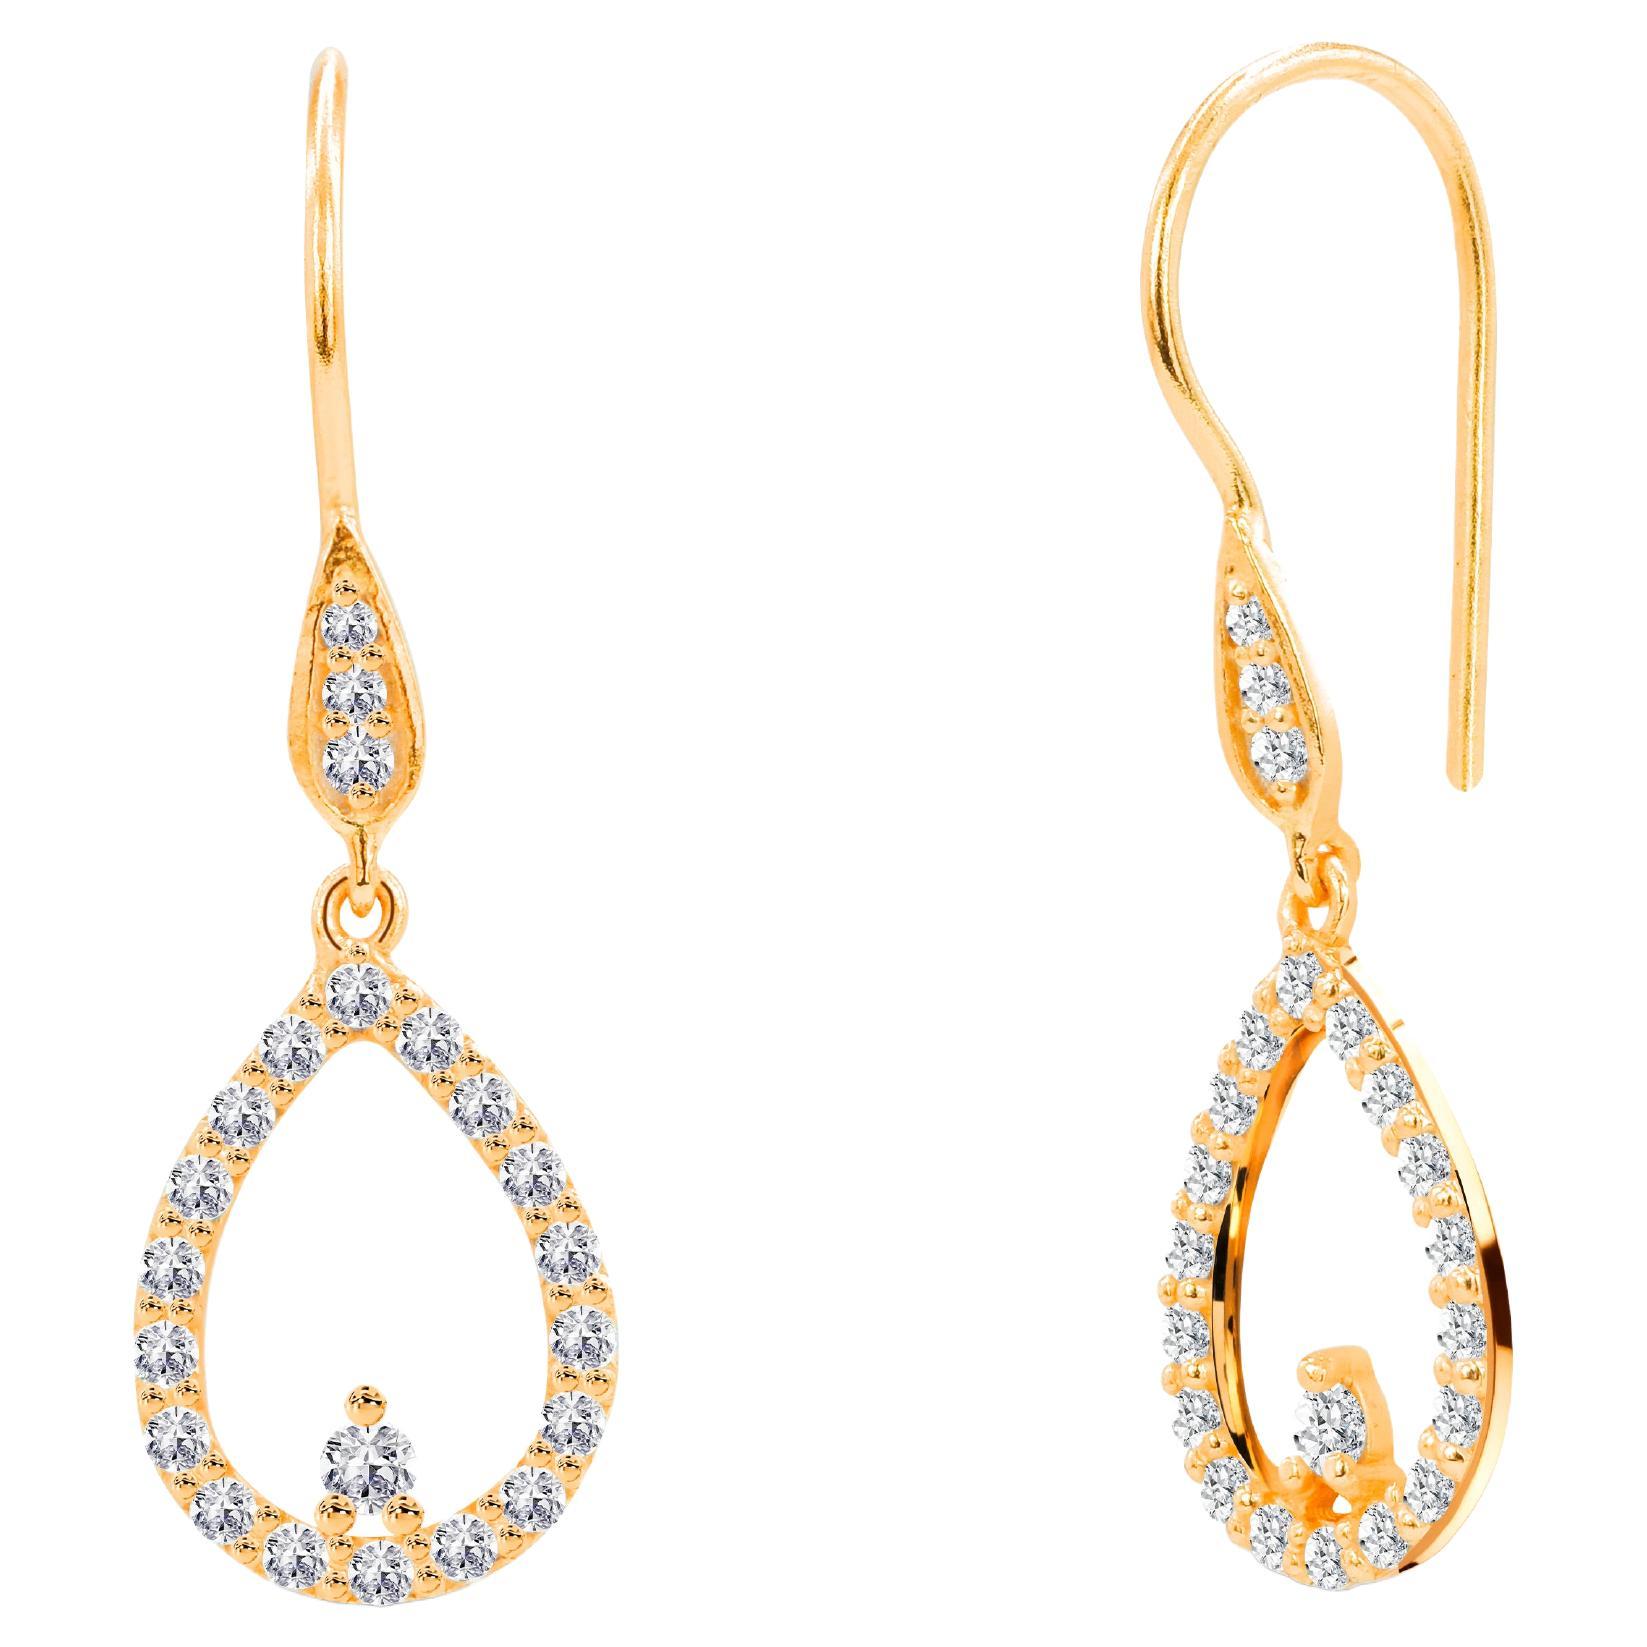 0.43ct Diamond Pear Shaped and Solitaire Diamond Dangle Earrings in 14k Gold